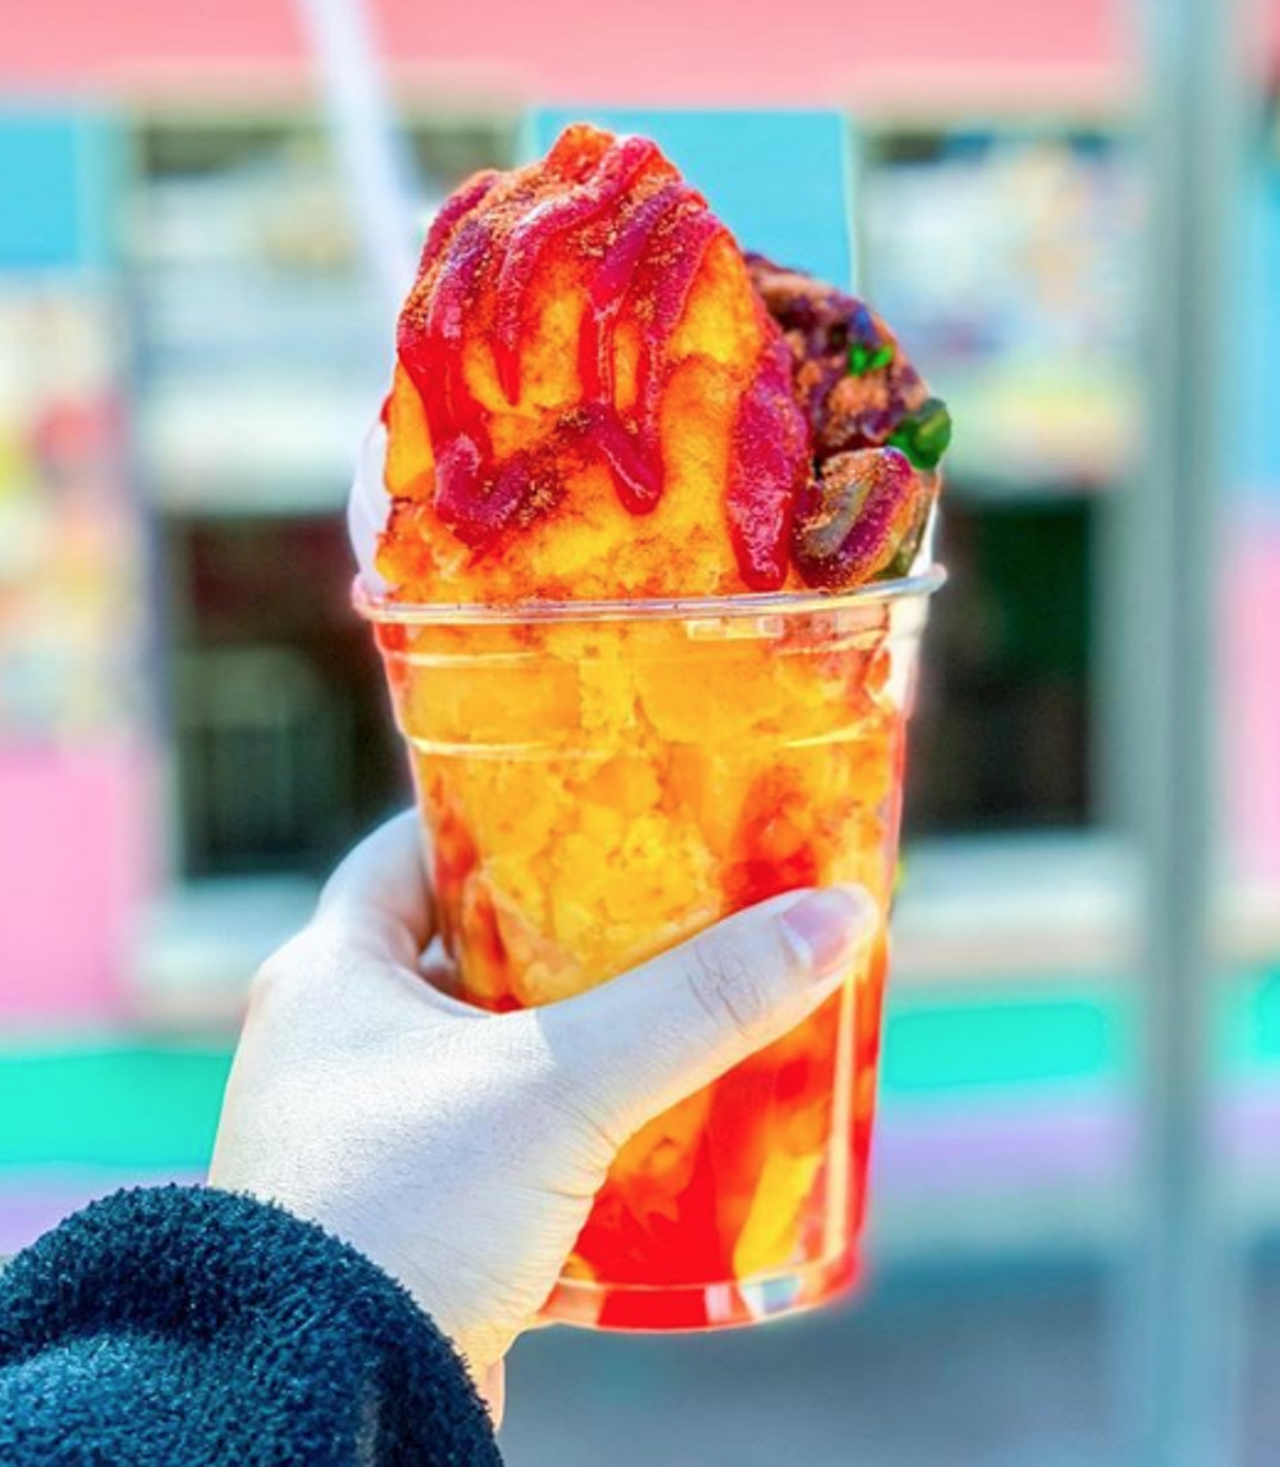 Mangonadas
Mangonadas are largely loved by Latinos, and San Antonio is known for getting the snack just right. Especially is the case for snack vendors who douse the treat in Tajin and chamoy to the point that the pica feels so, so good.
Photo via Instagram / stine.eats